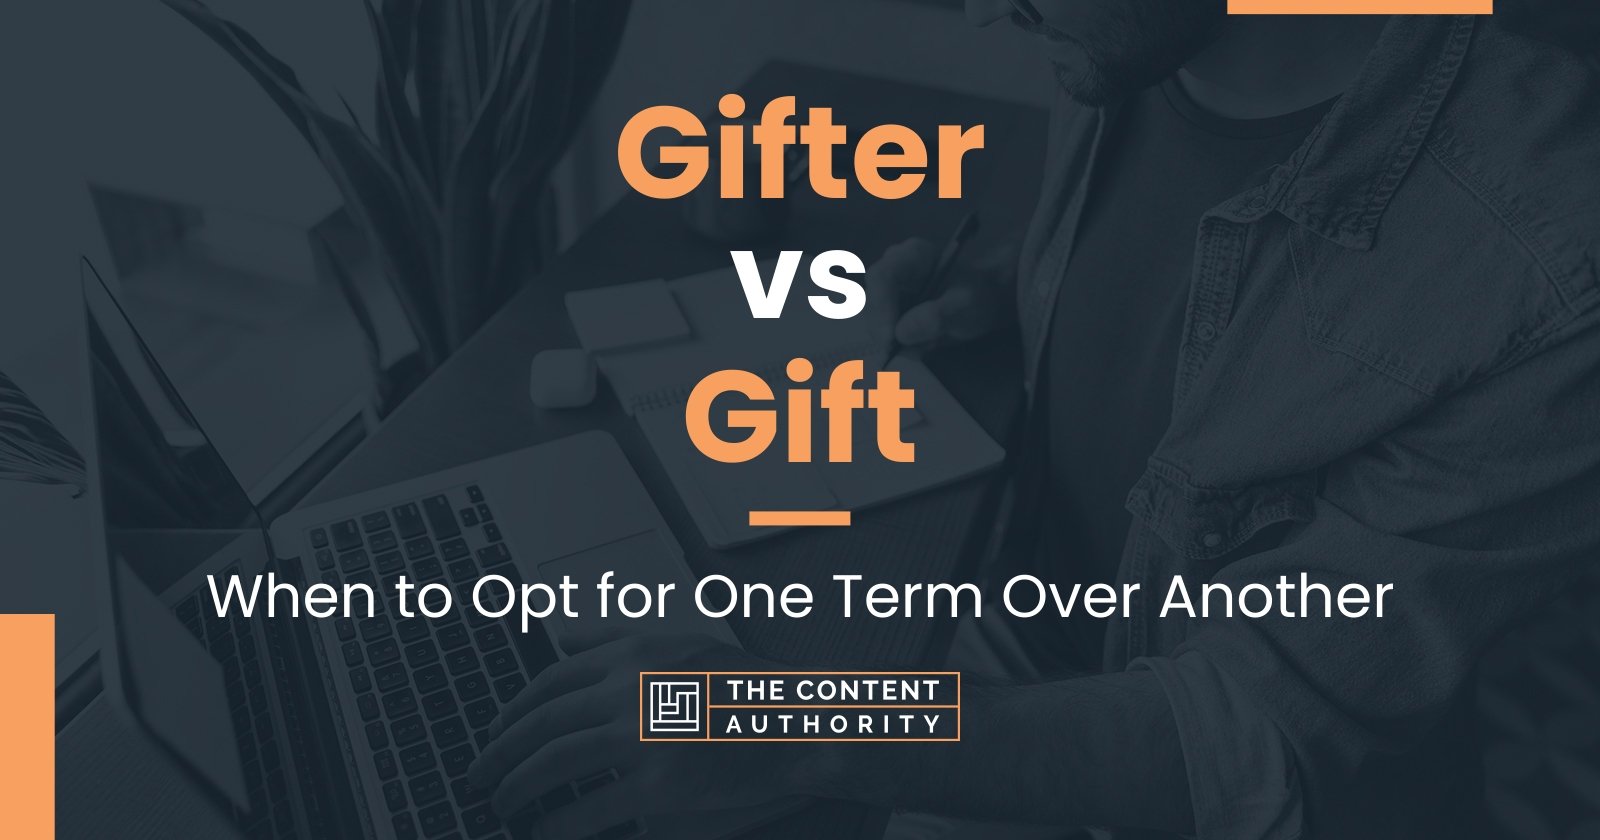 Gifter vs Gift When to Opt for One Term Over Another